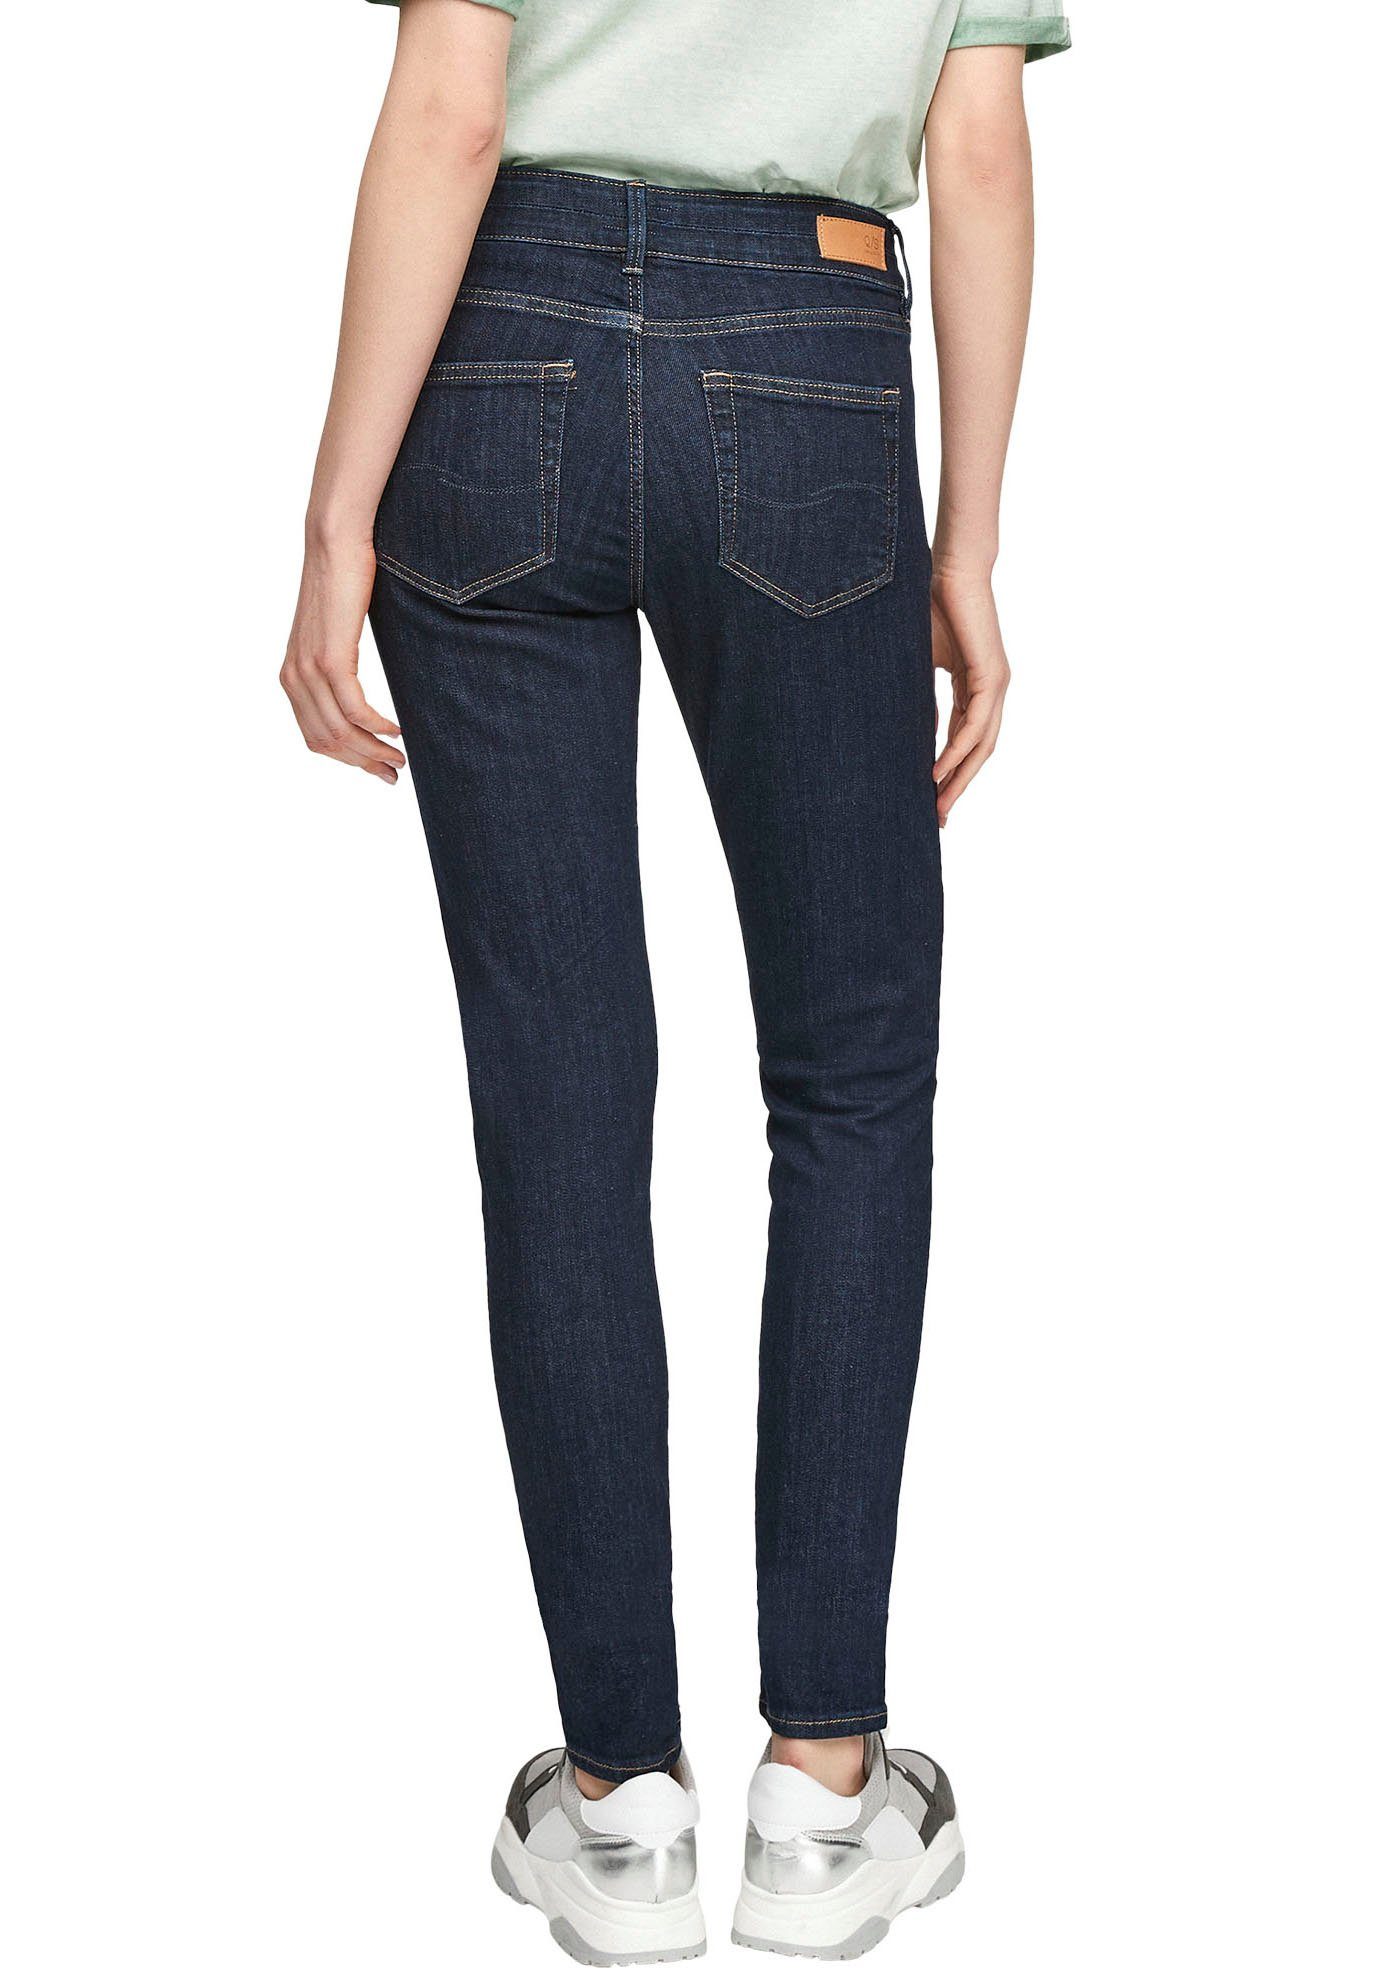 Damen Jeans Q/S by s.Oliver Skinny-fit-Jeans Sadie in cleaner Waschung